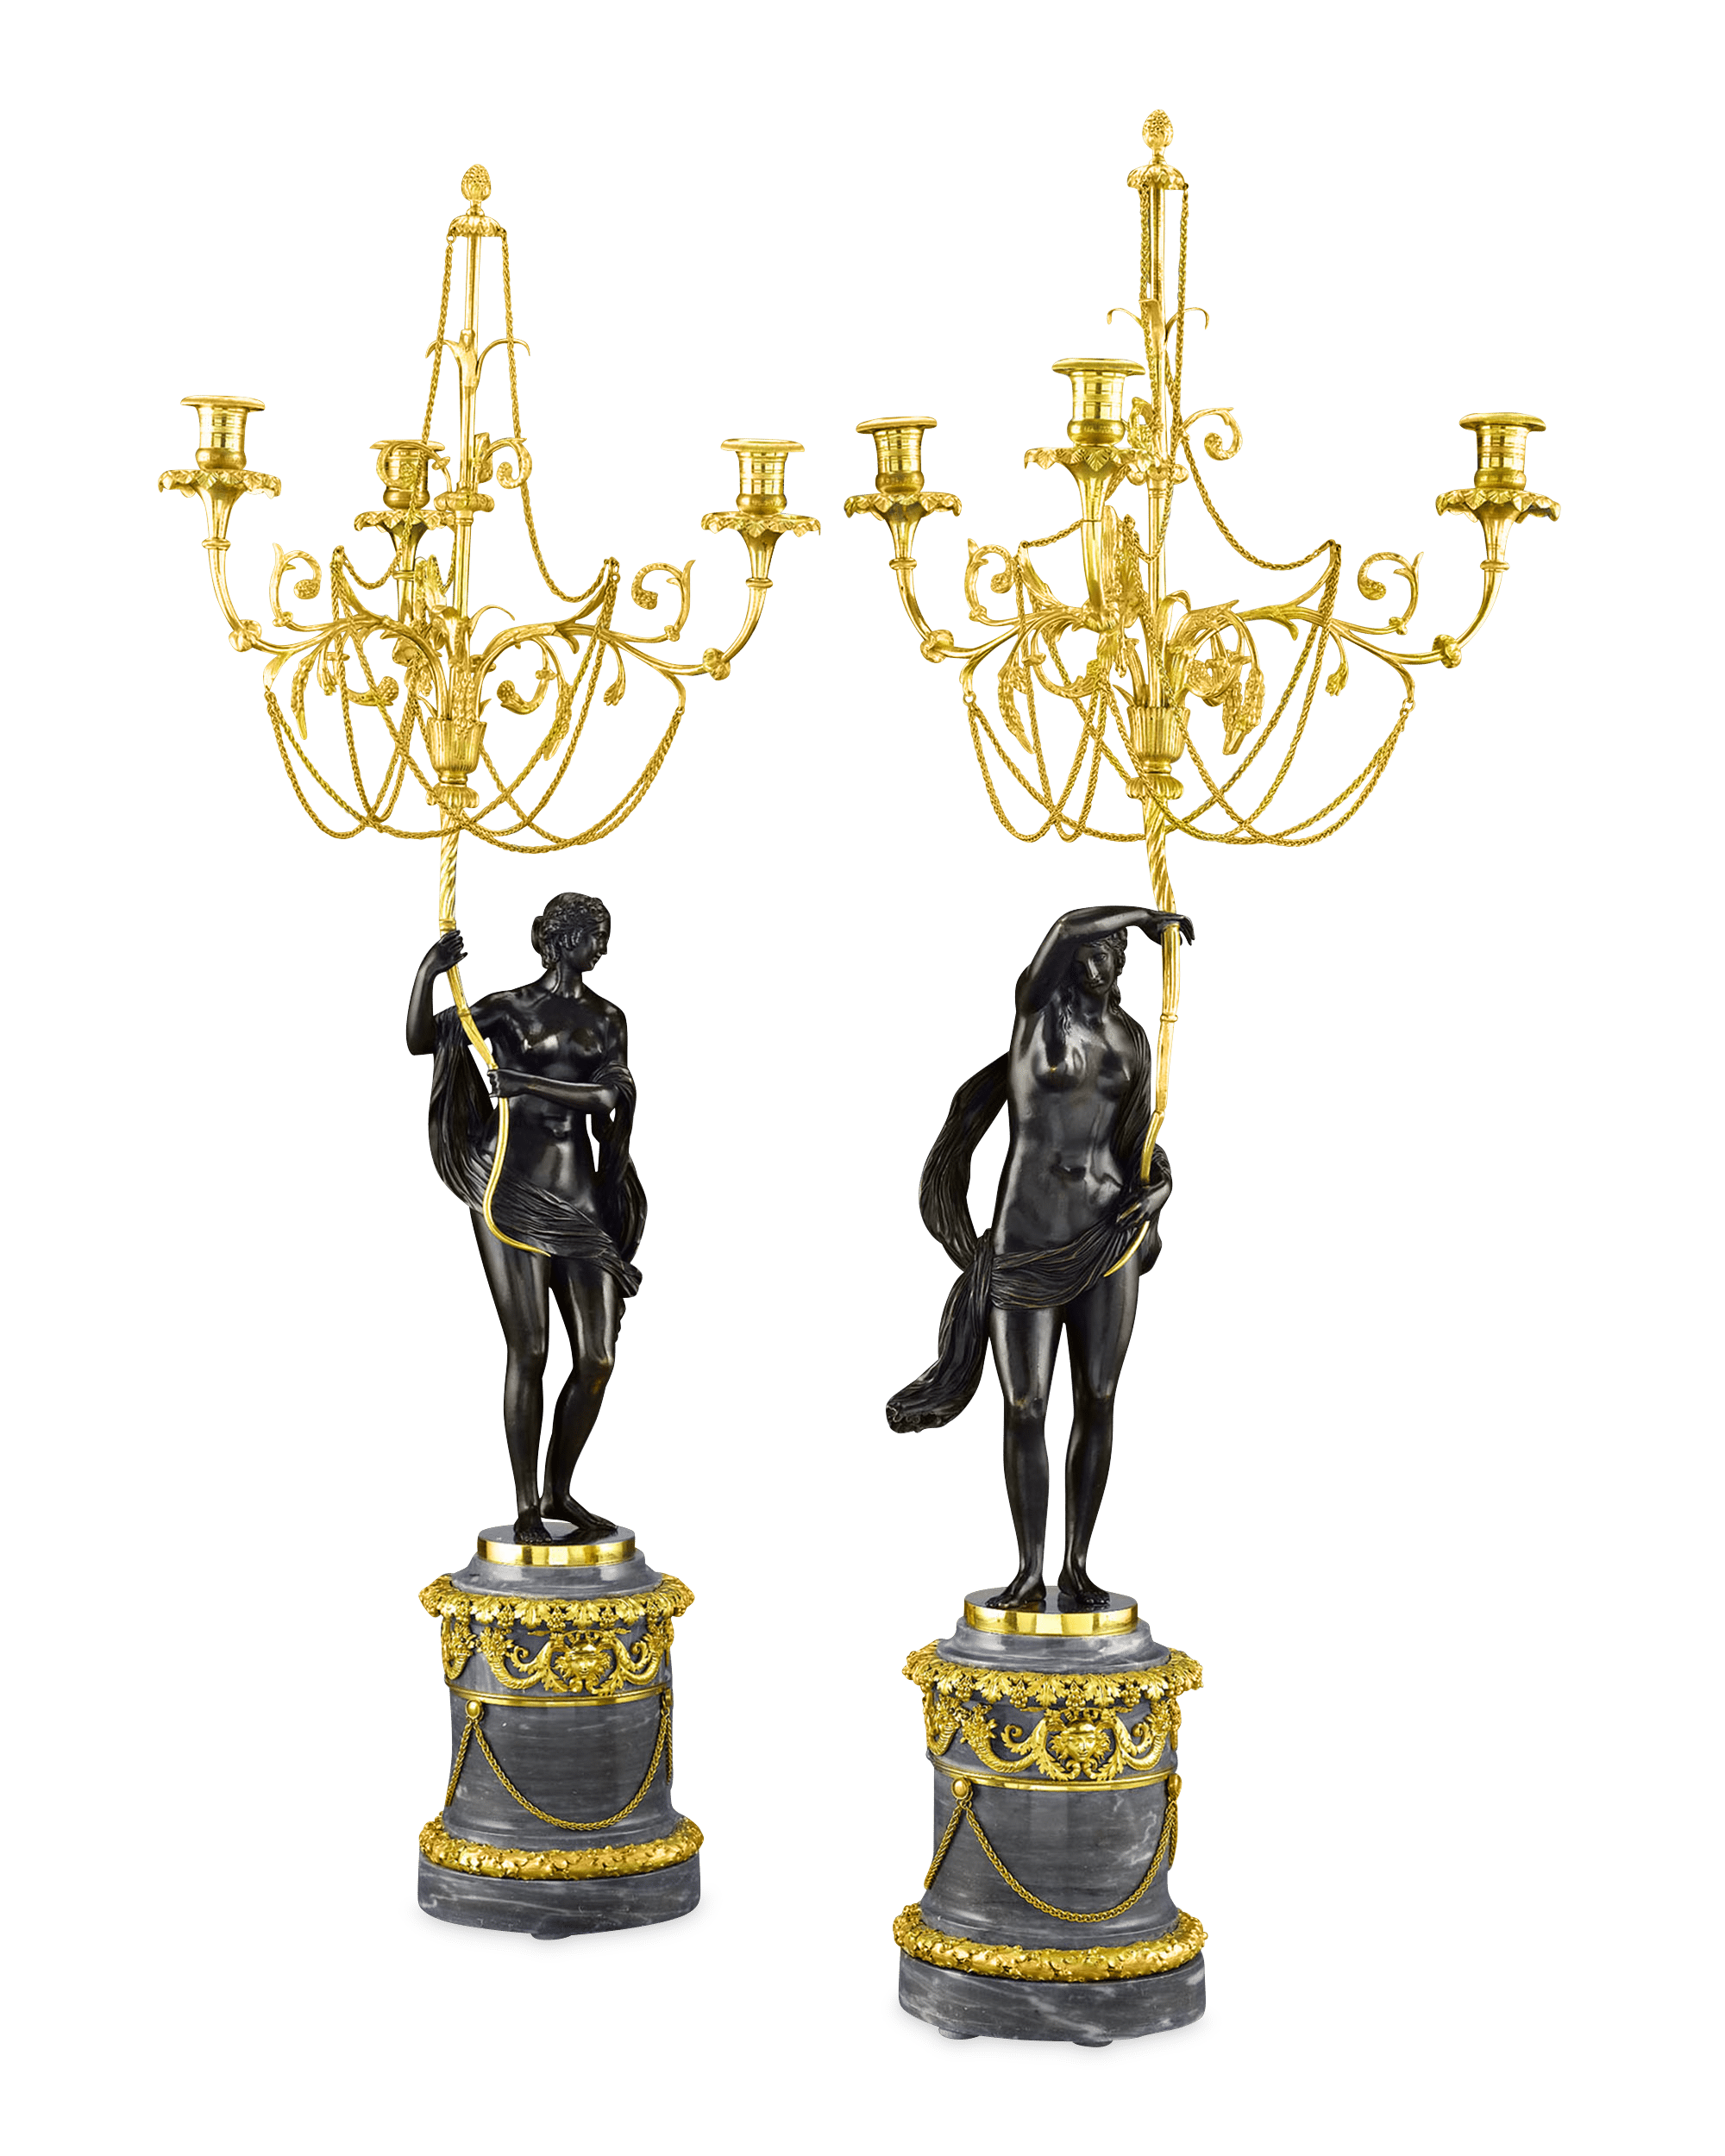 Classical nudes support these delicate lights